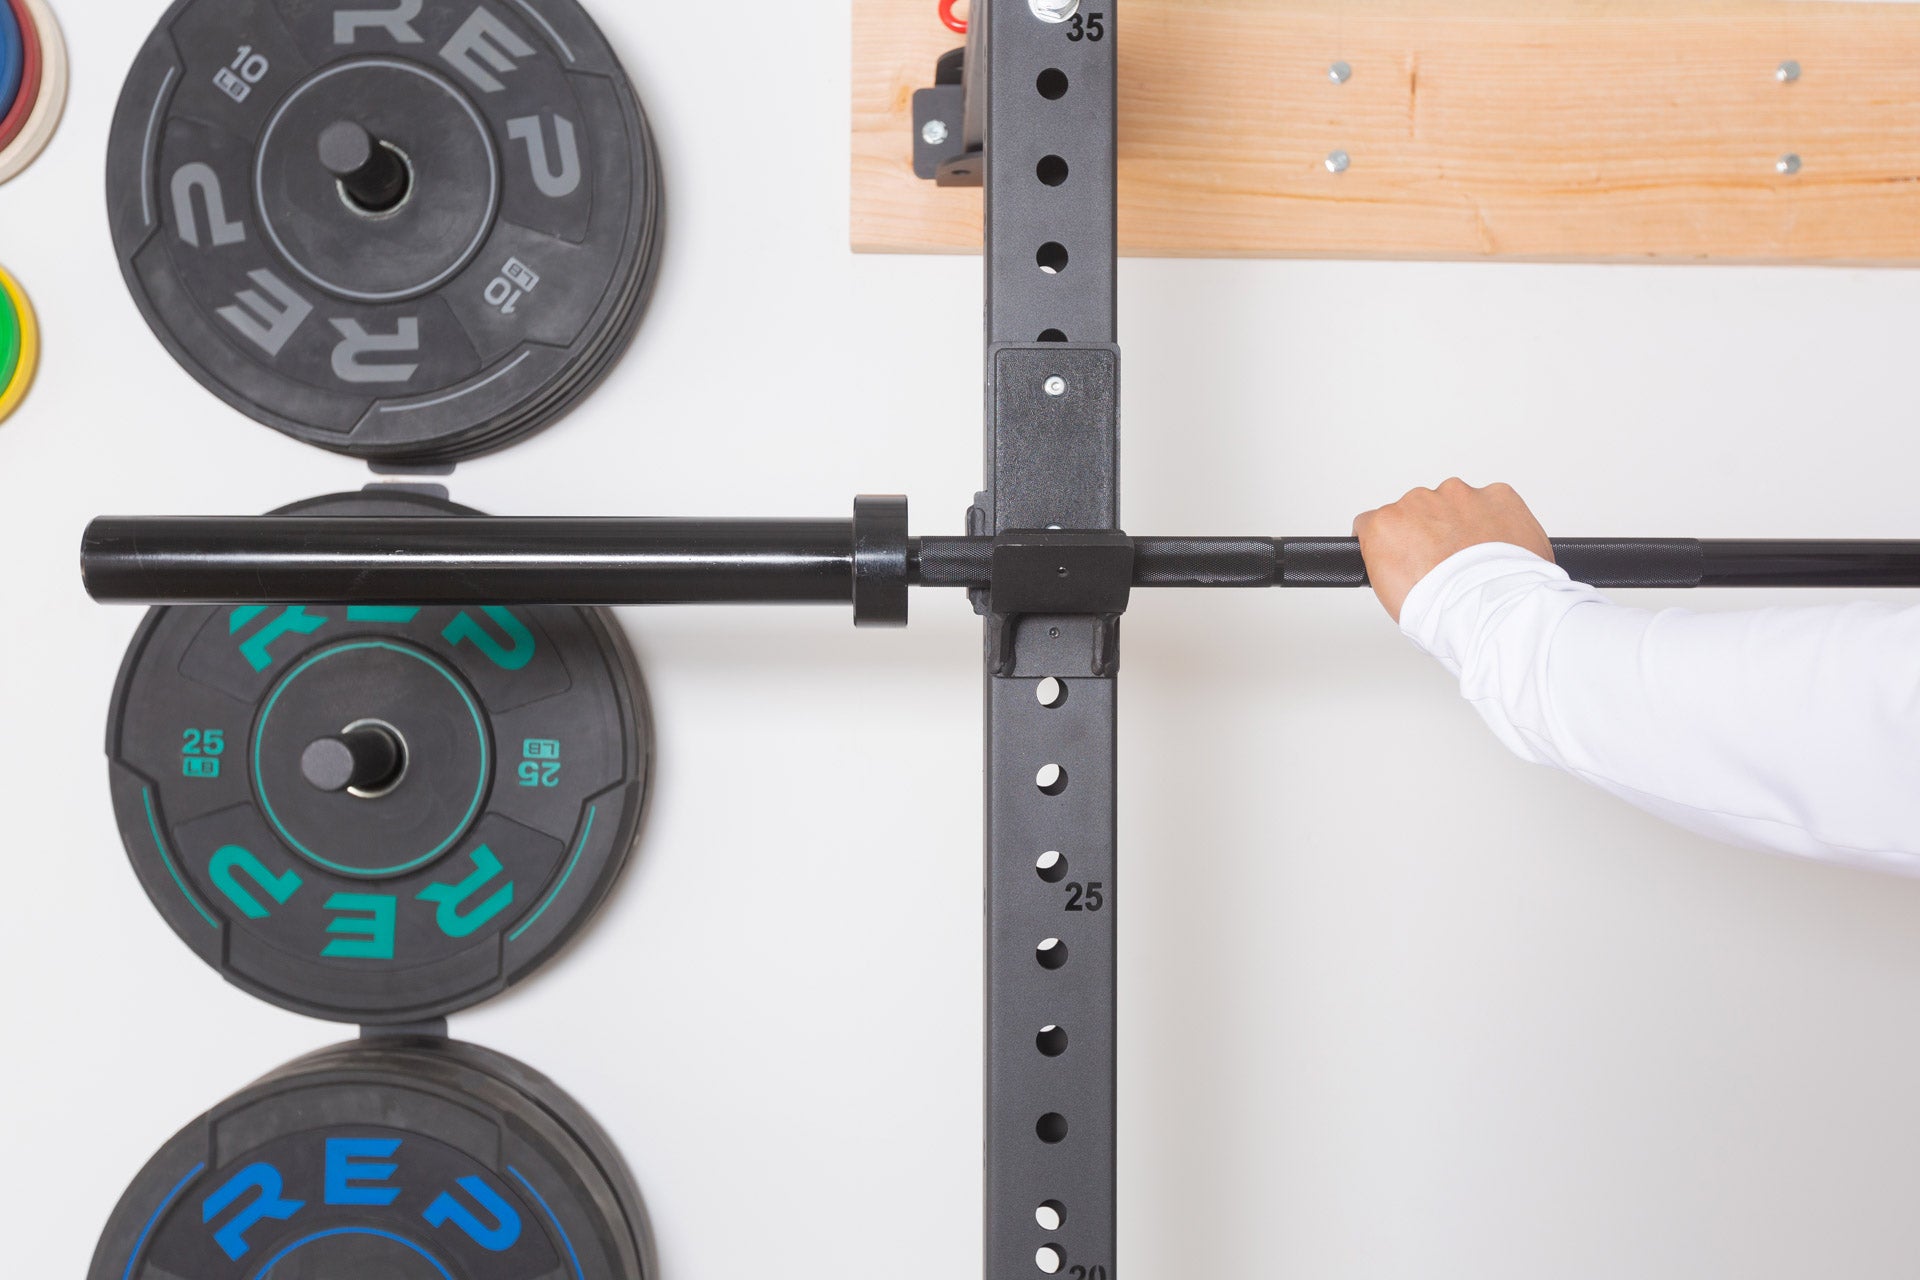 Three single Wall Mounted Plate Storage units attached to the wall and loaded with bumper plates.